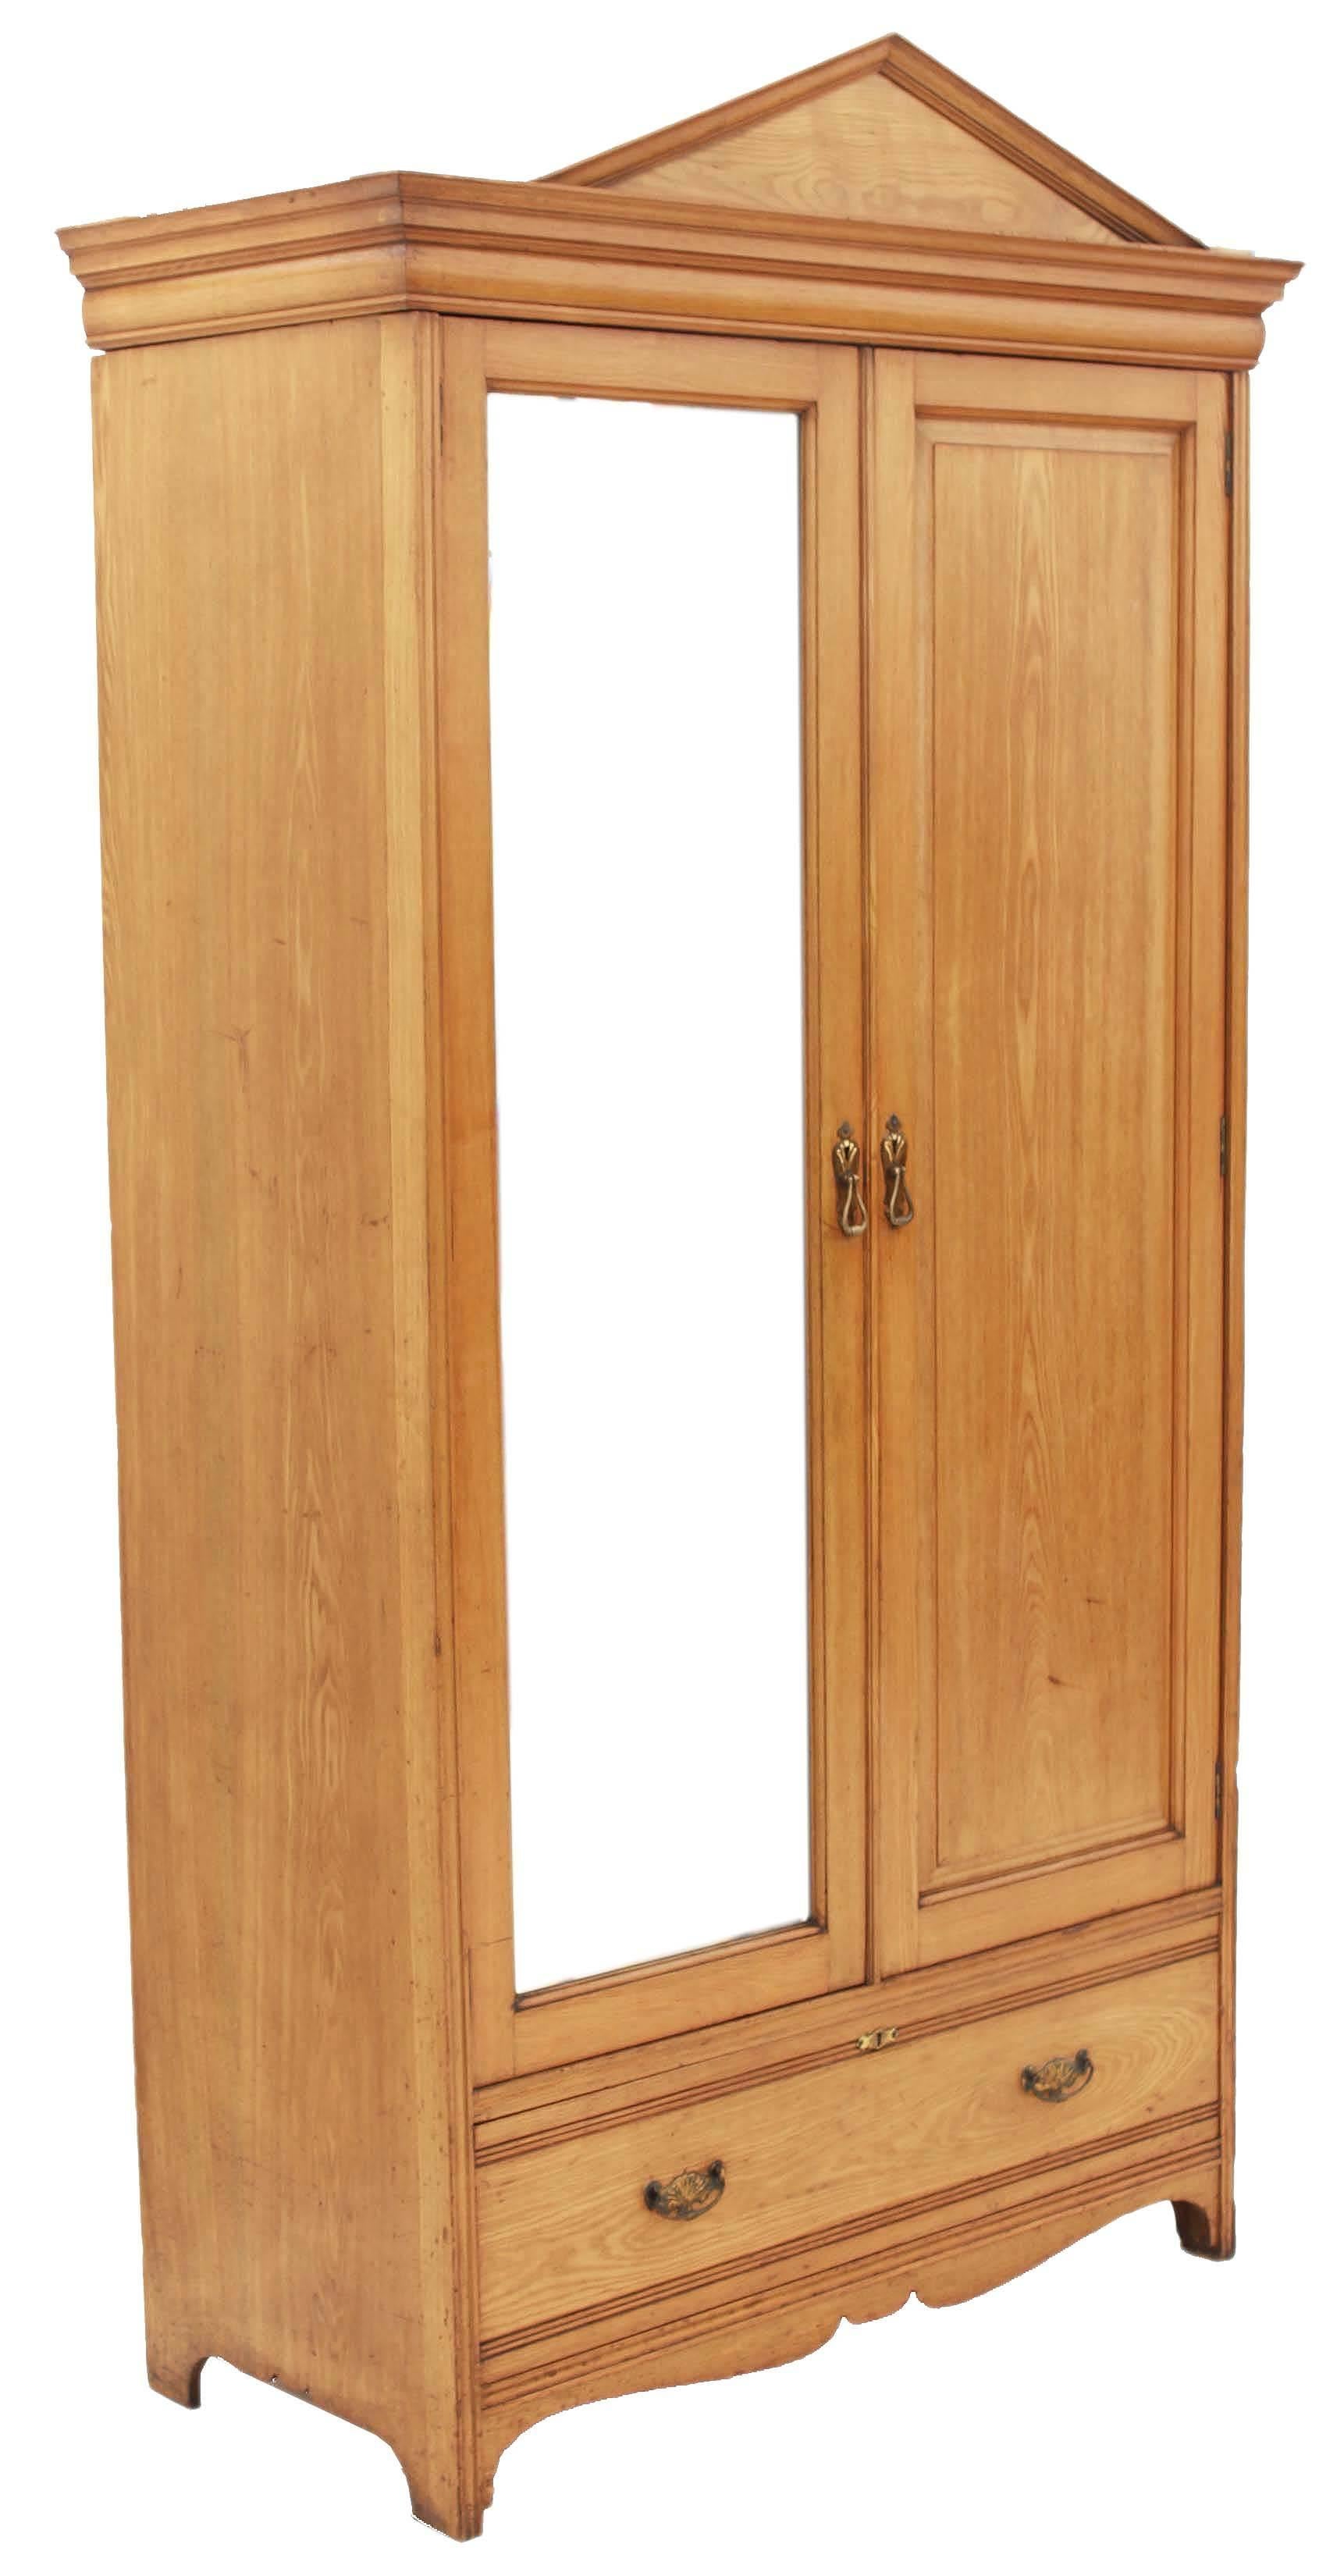 
Description

Antique tall large quality Gothic late Victorian 19th century (could be Edwardian early 20th century) ash (similar to light oak) armoire wardrobe.

 Very large and tall proportions making it quite imposing, with clean Gothic